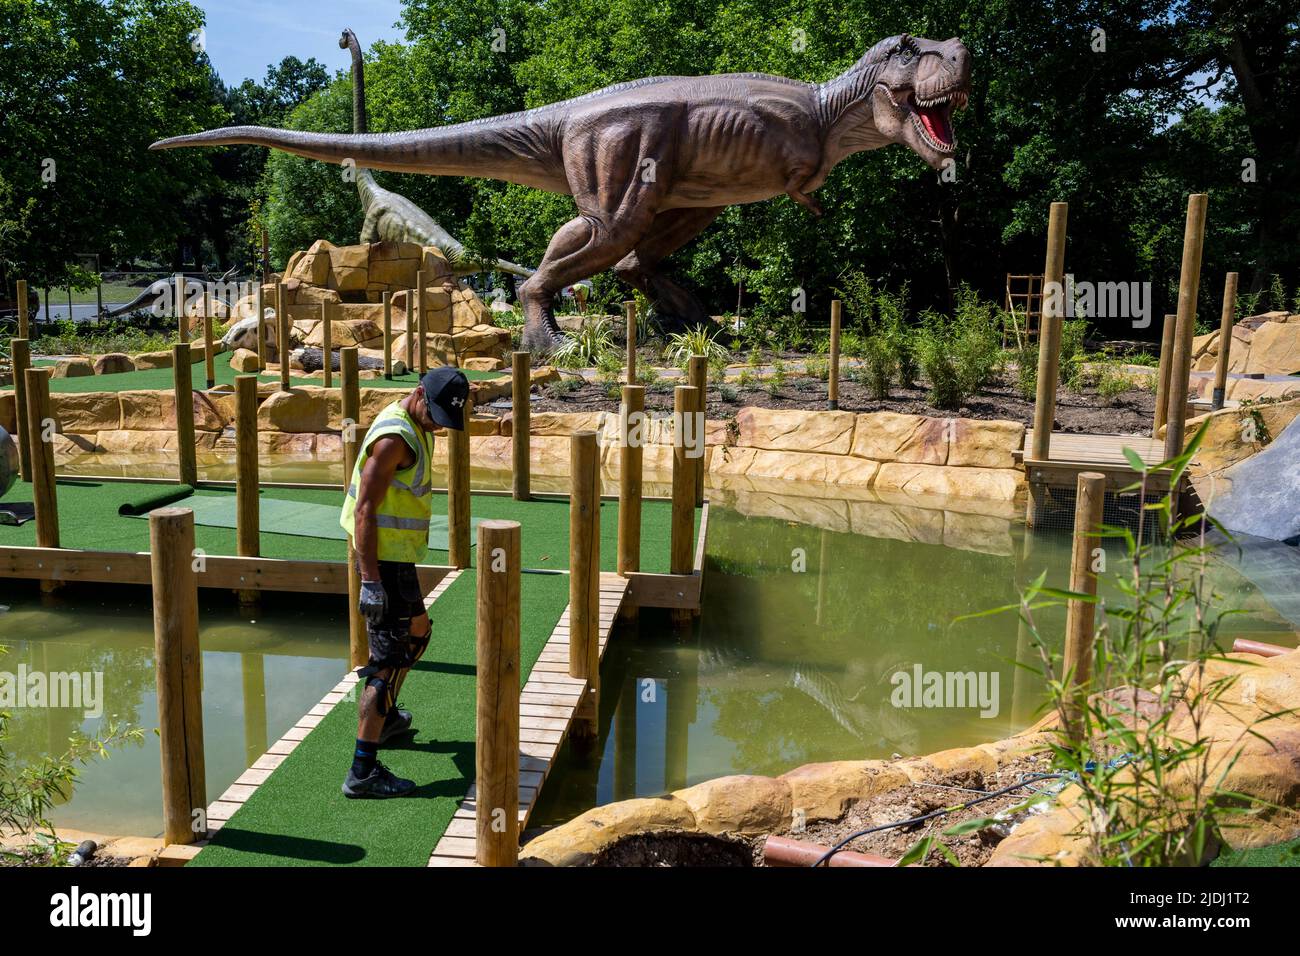 London, UK. 21 June 2022. Finishing touches are made to Jurassic Island, a  dinosaur-themed crazy golf course, being constructed in Harrow. Life-sized  dinosaurs are interspersed amongst the holes on the golf course